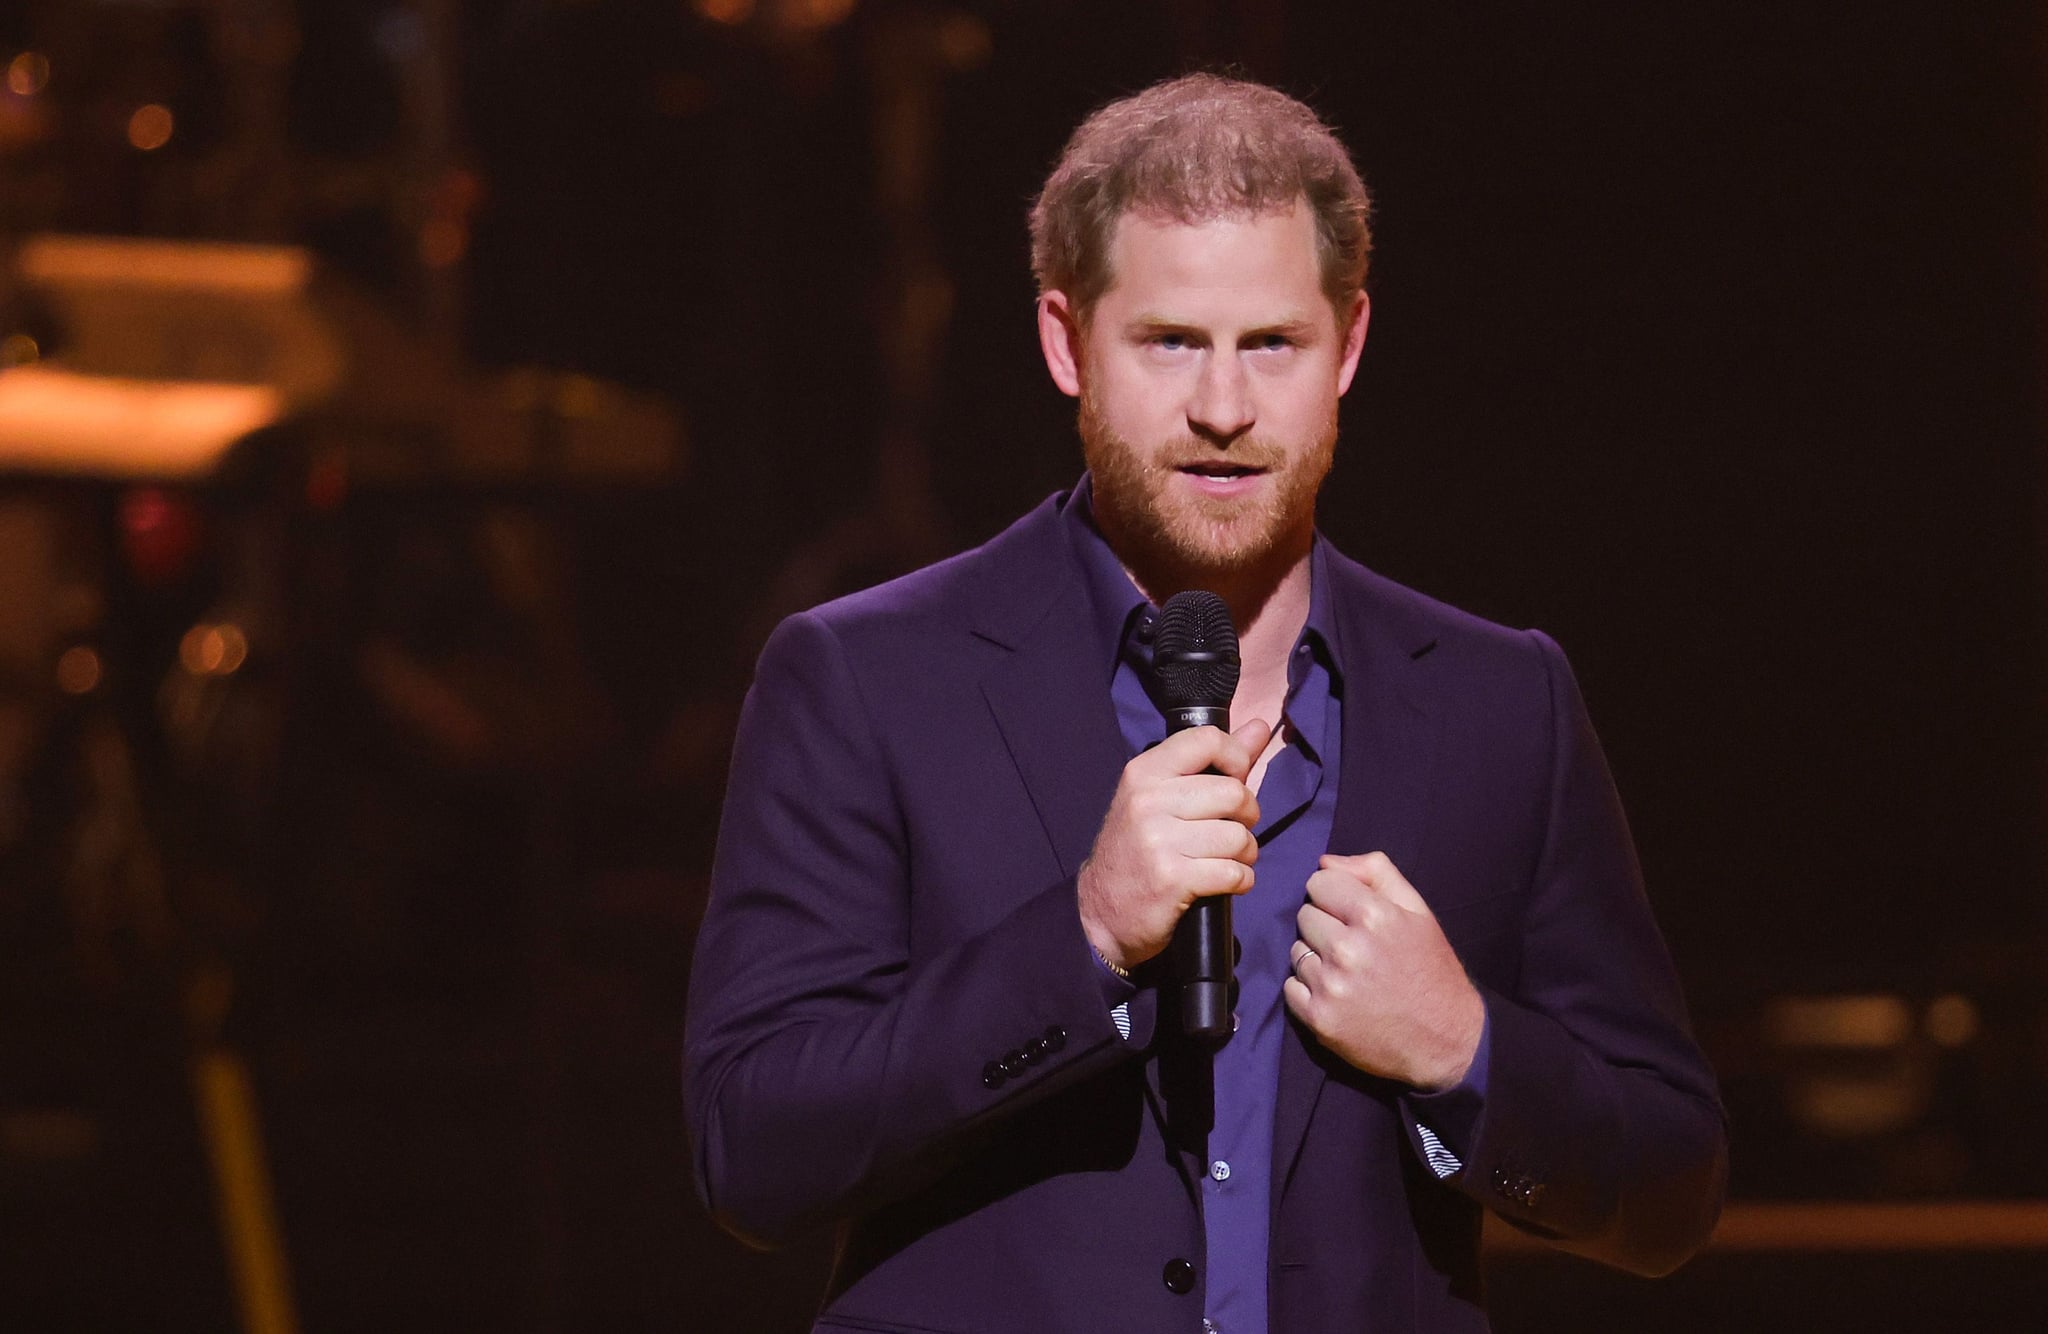 THE HAGUE, NETHERLANDS - APRIL 22: Prince Harry, Duke of Sussex speaks on stage during the Invictus Games The Hague 2020 Closing Ceremony at Zuiderpark on April 22, 2022 in The Hague, Netherlands. (Photo by Chris Jackson/Getty Images for the Invictus Games Foundation)